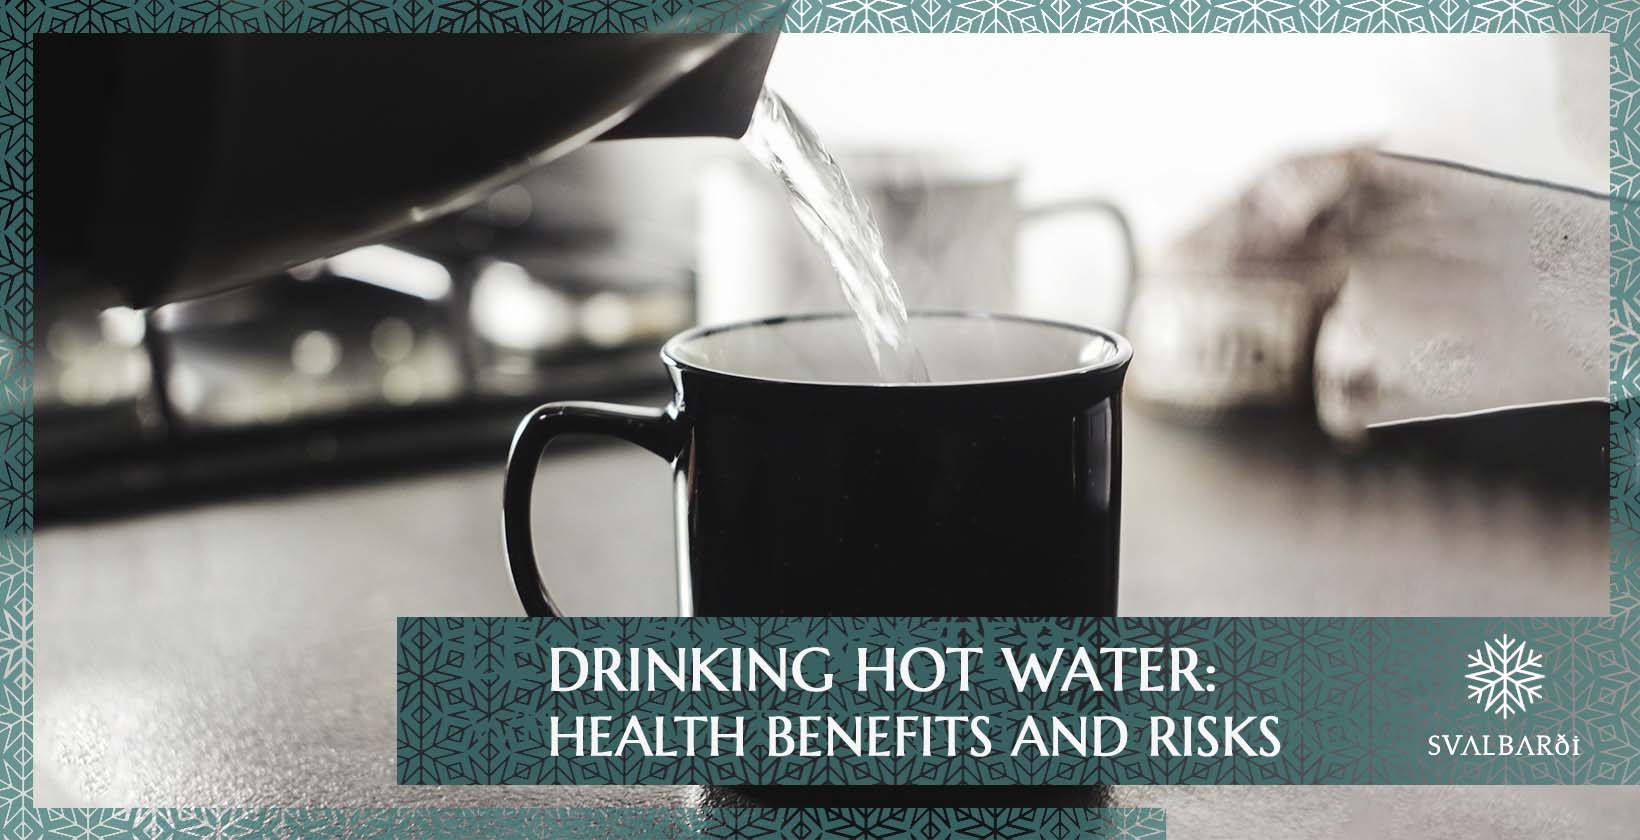 Drinking hot water: Benefits and risks